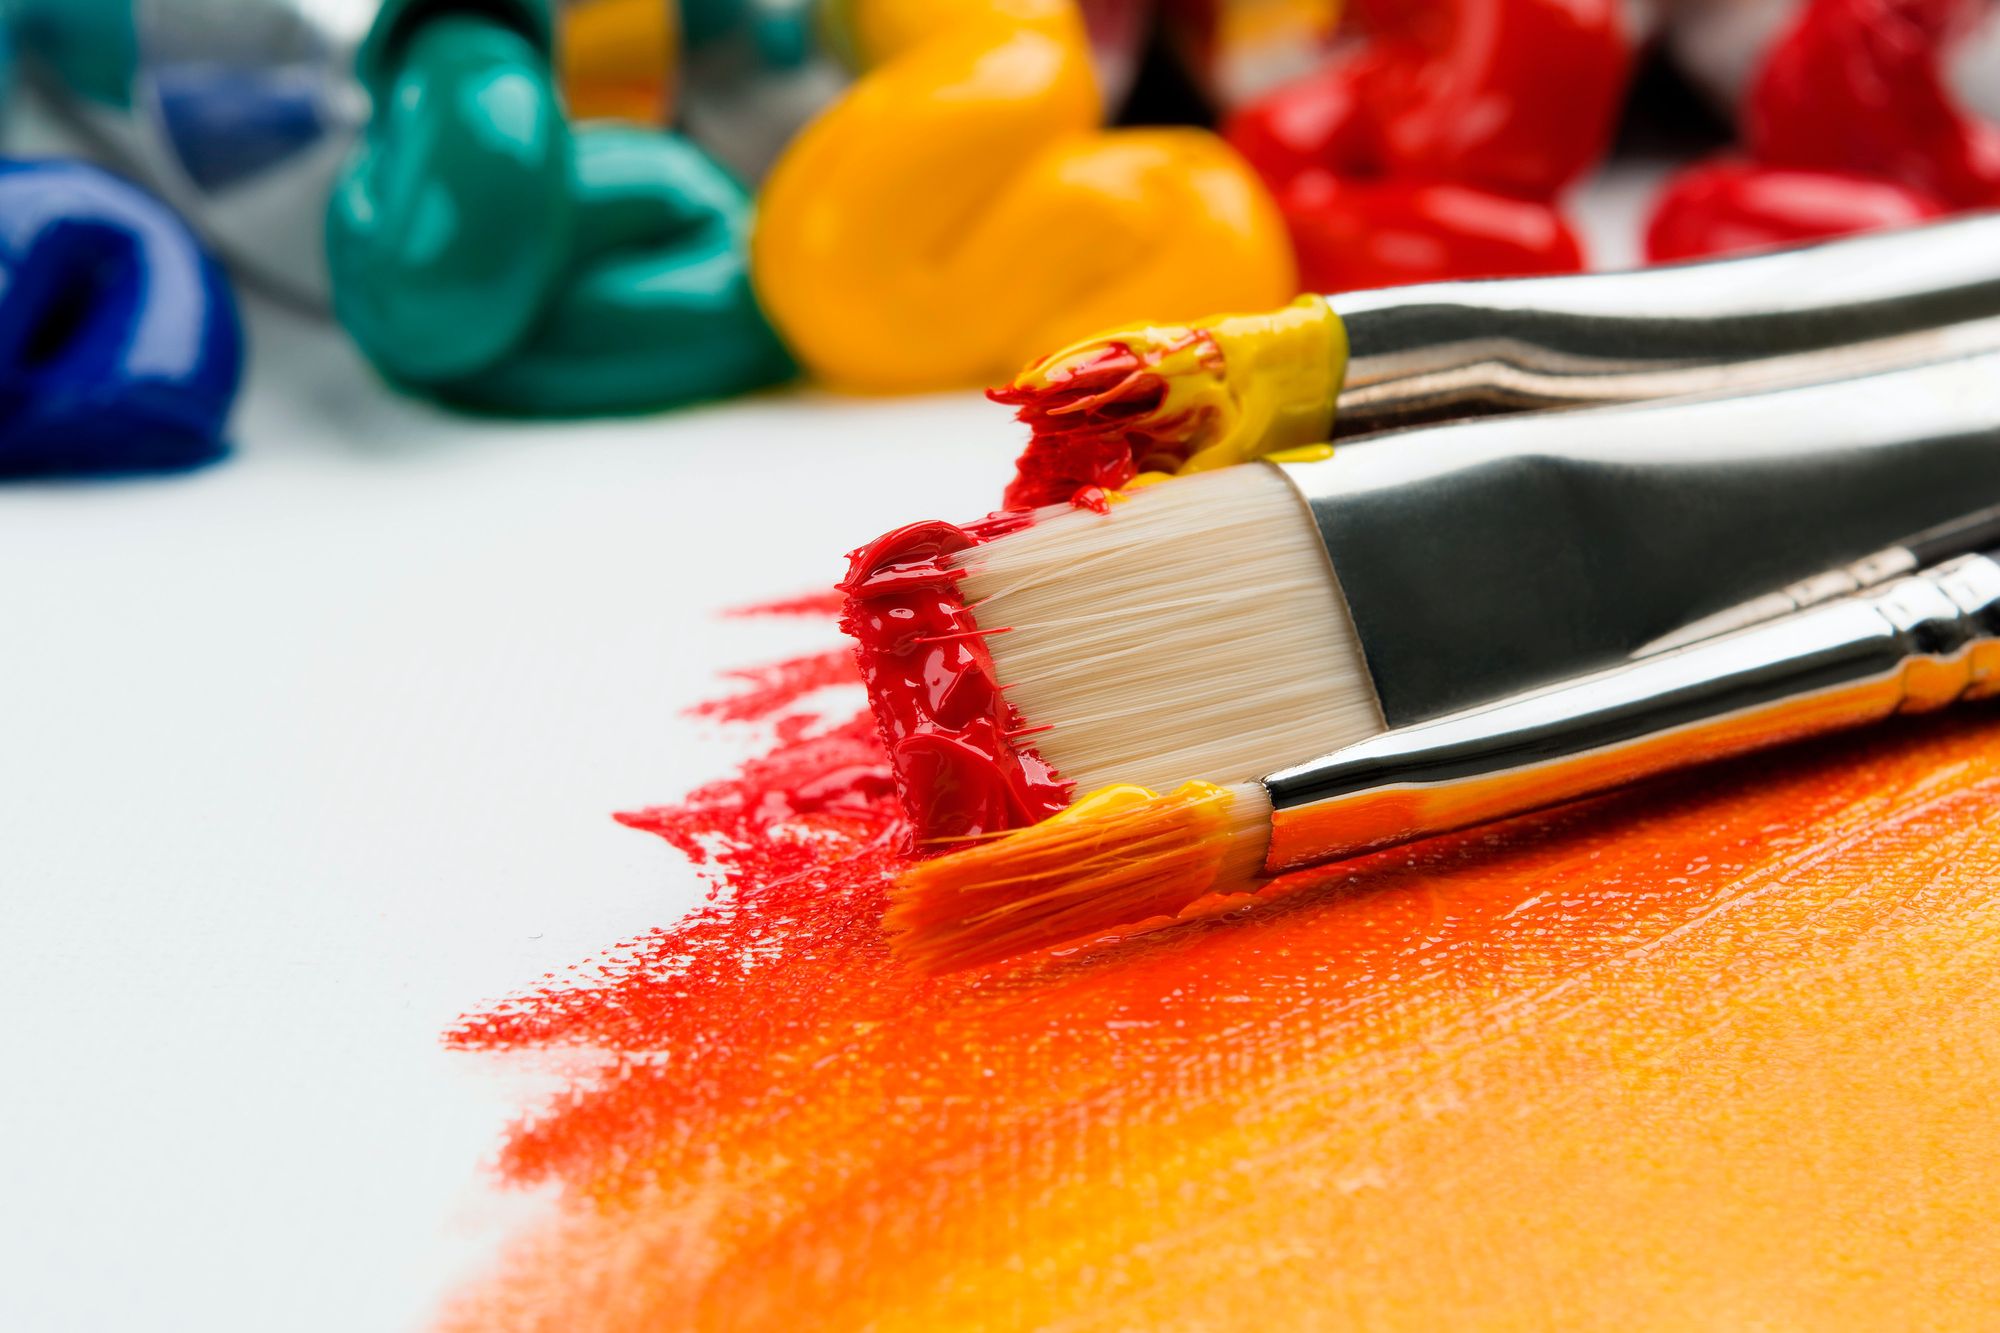 Getting to Know the Different Types of Paints for Art: A Quick Guide to the Three Most Popular Painting Mediums